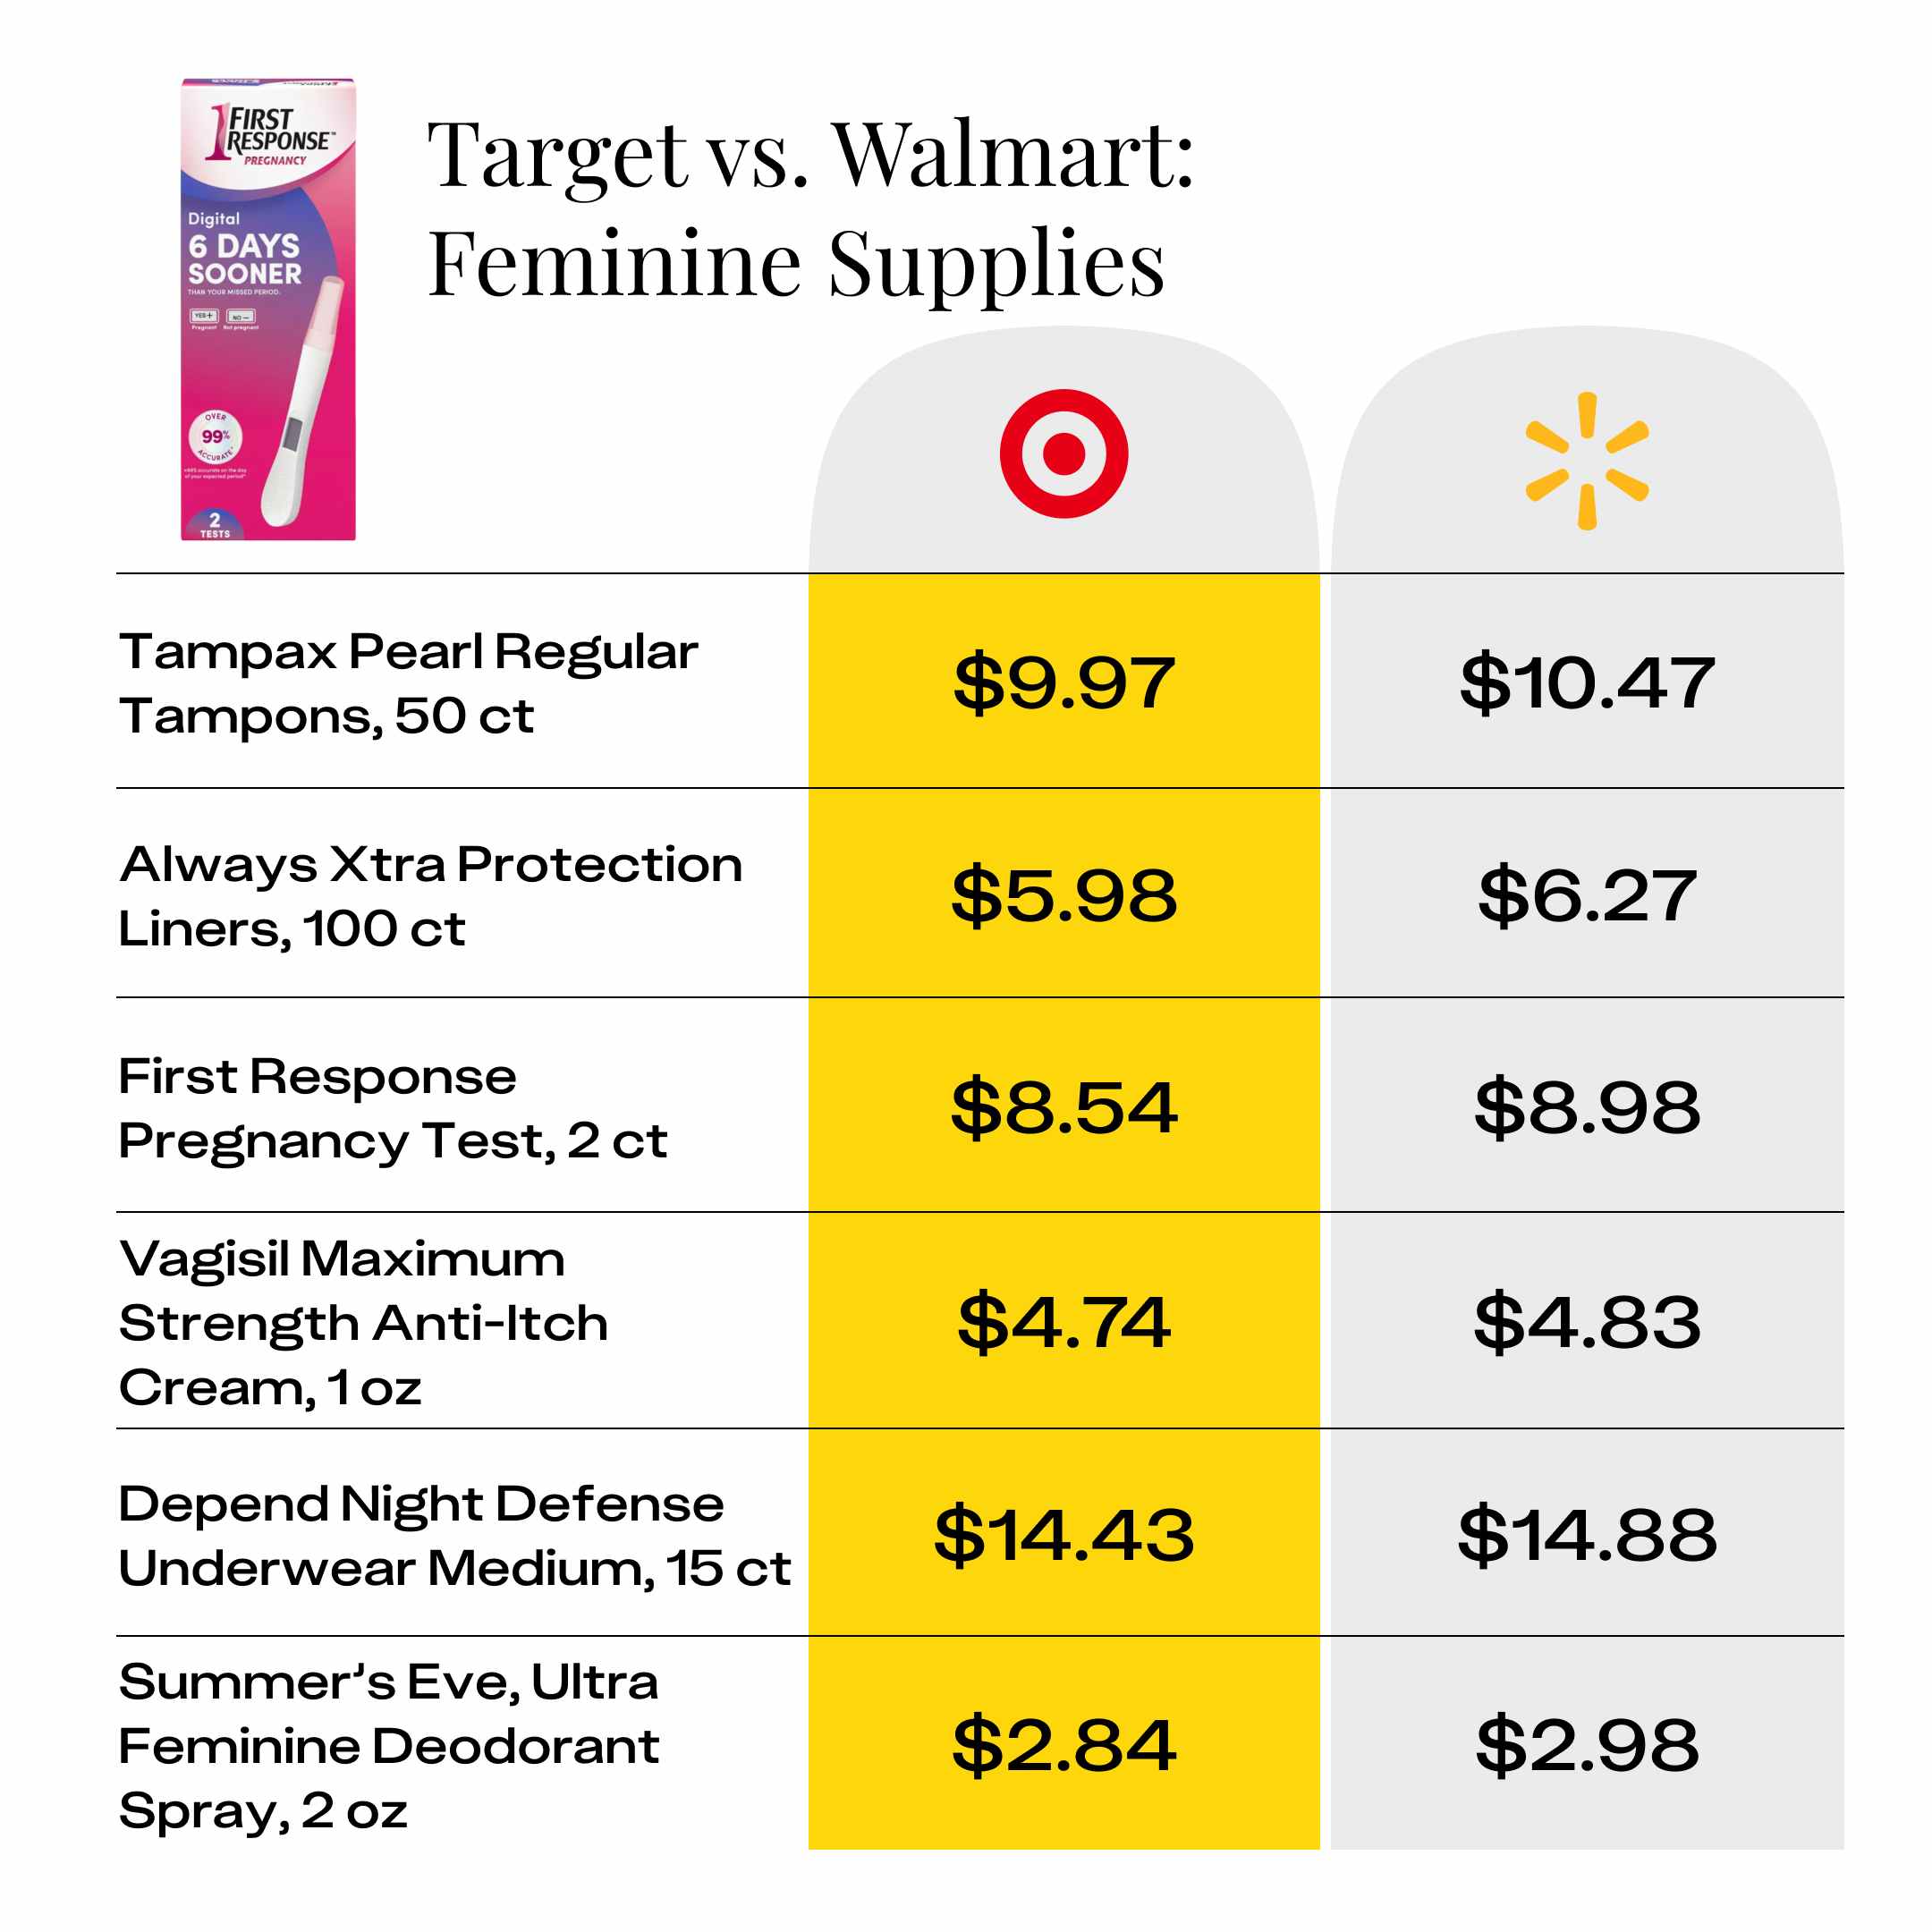 price comparison for feminine supplies at Target and Walmart